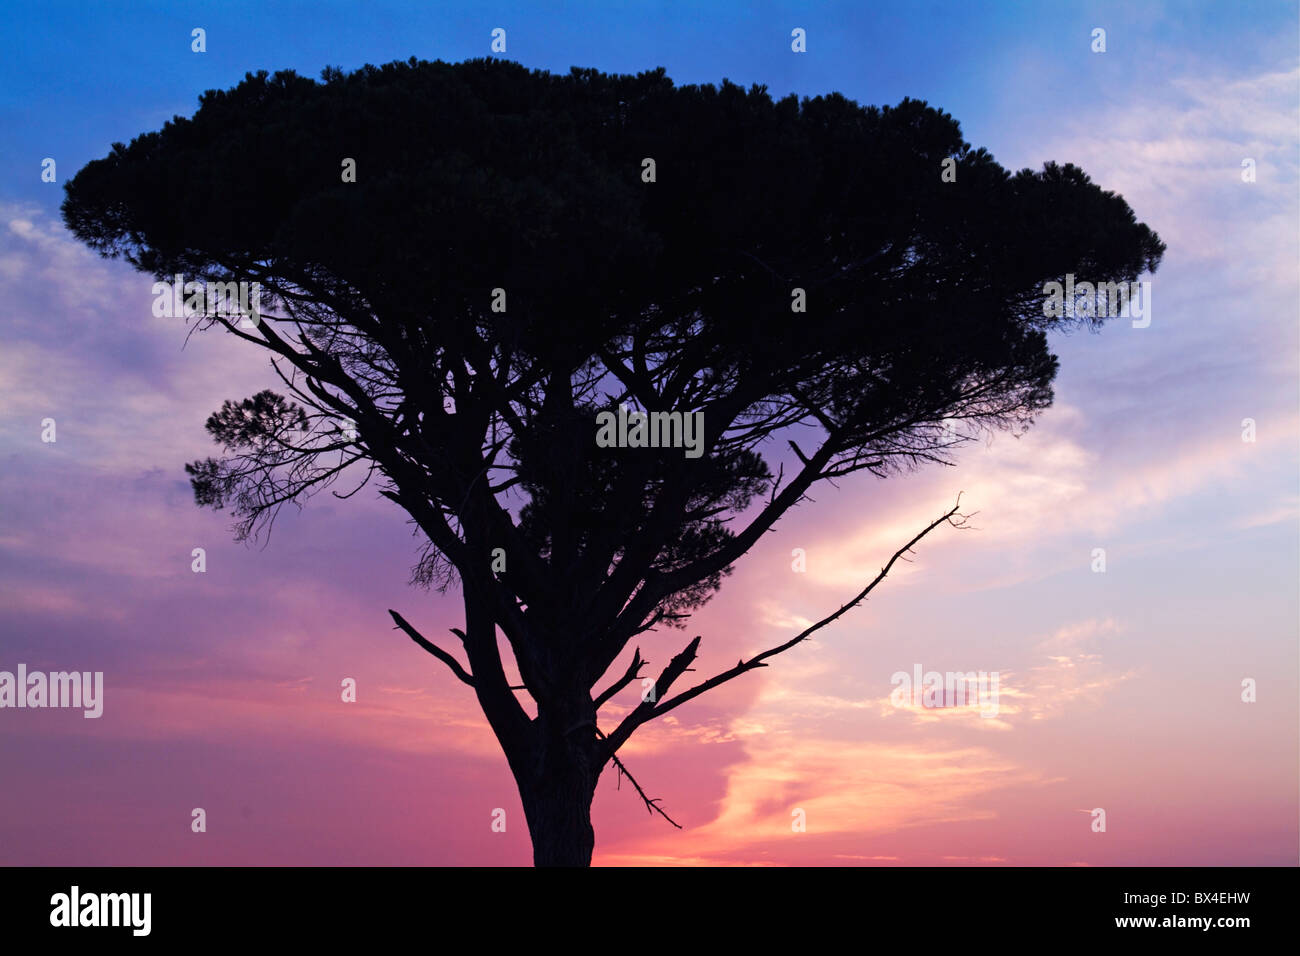 Silhouette of an old pine tree at sunset, Carcassonne, Aude, France. Stock Photo